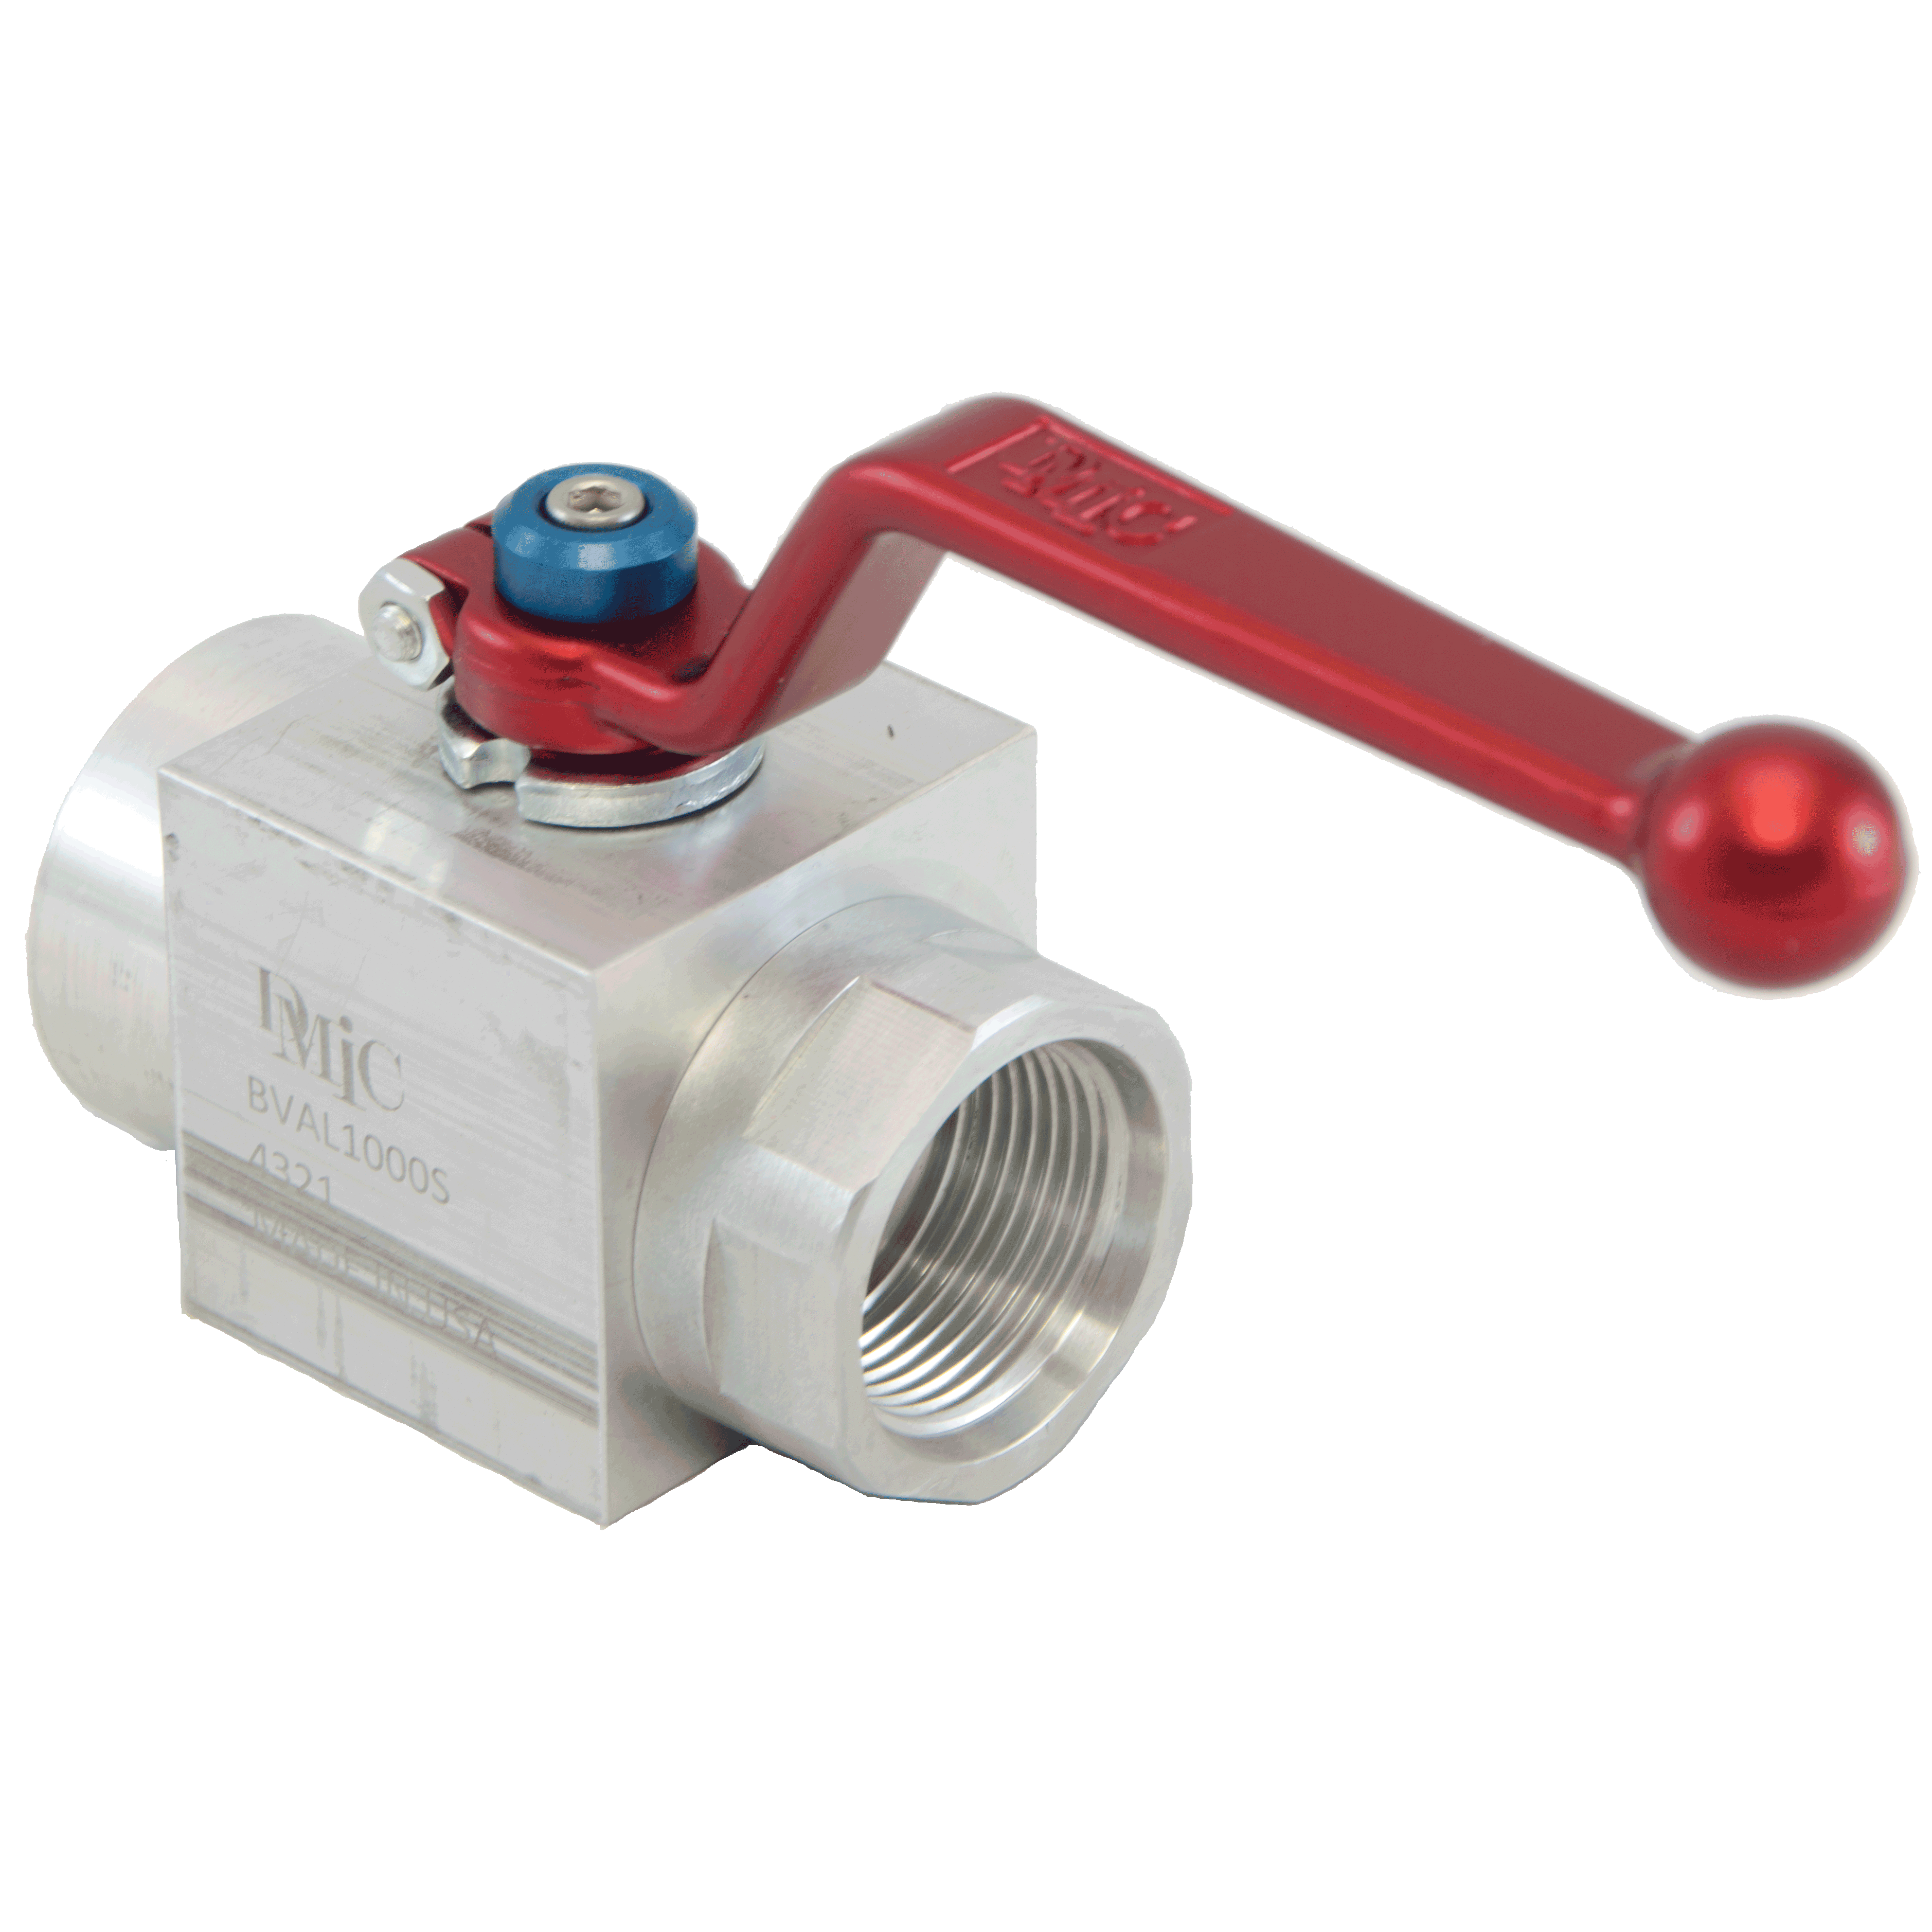 BVAL-0500S-4321 : DMIC Suction Ball Valve, #8 SAE (1/2), Aluminum, 600psi, Two-Way